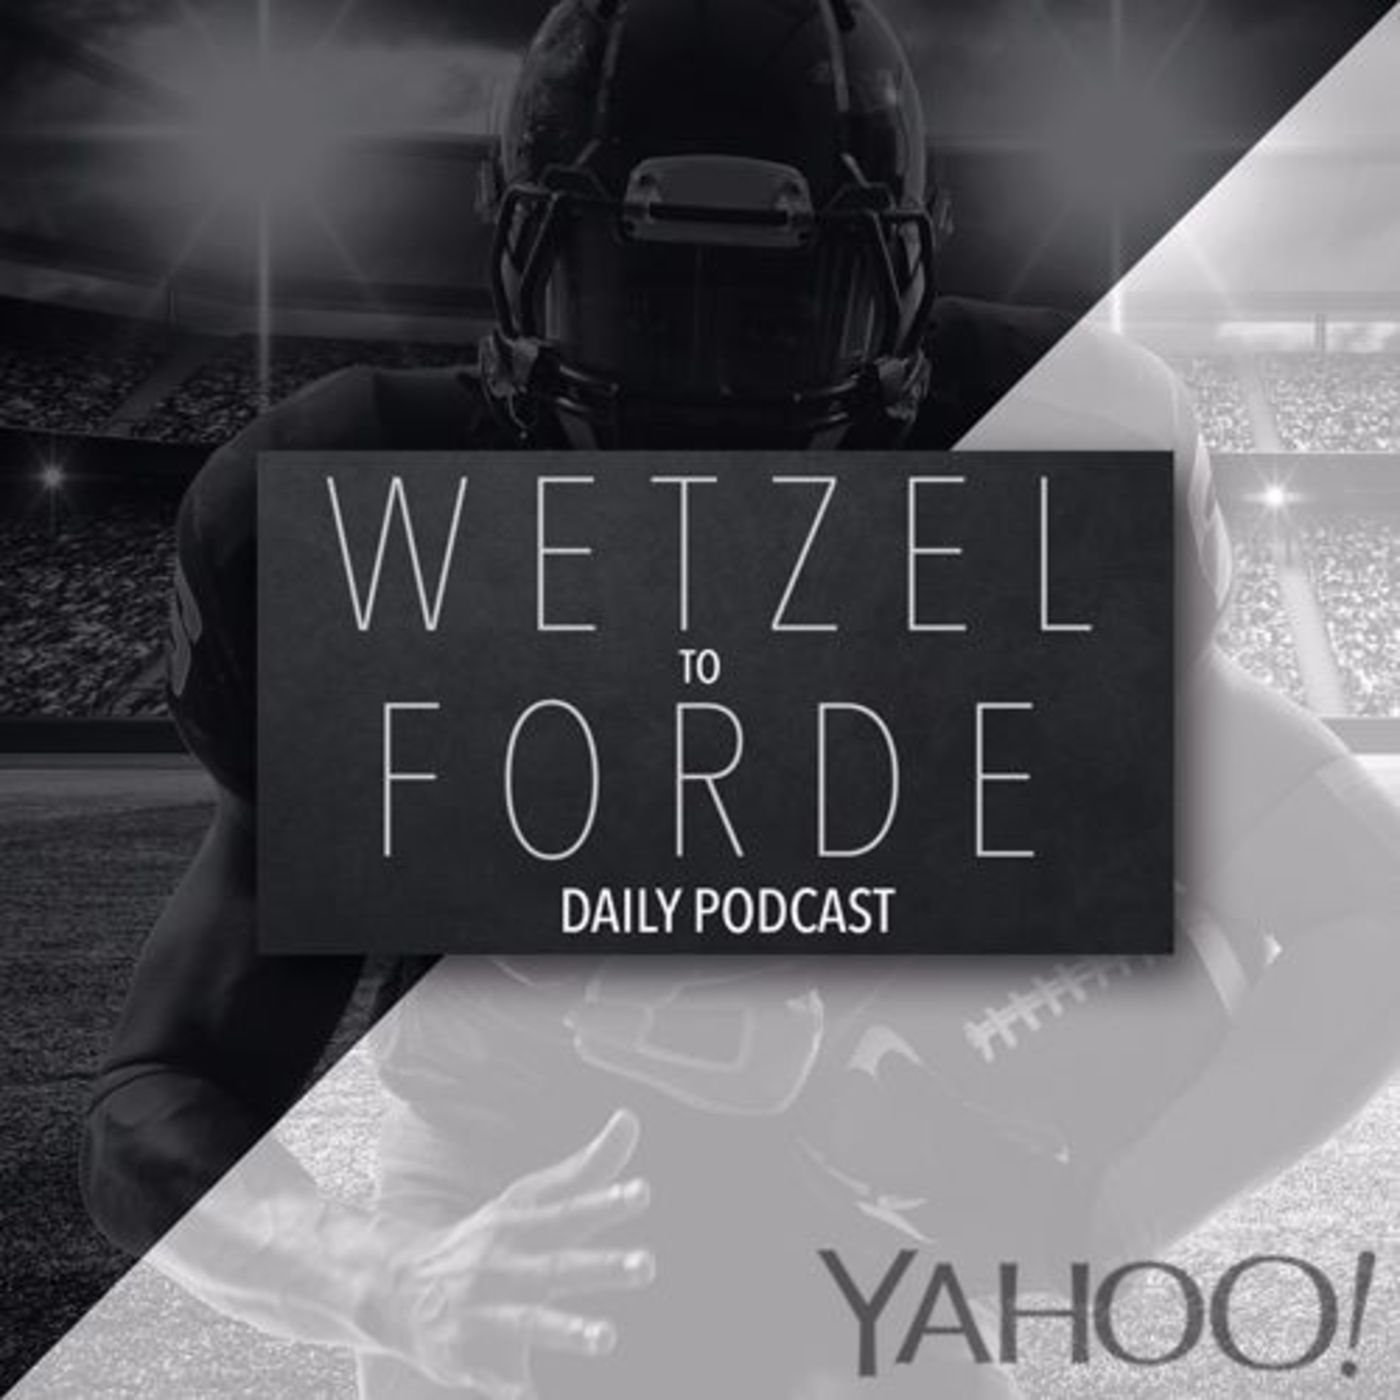 Is Texas A&M slipping out of Kevin Sumlin's control? Wetzel To Forde (12 - 17 - 15)